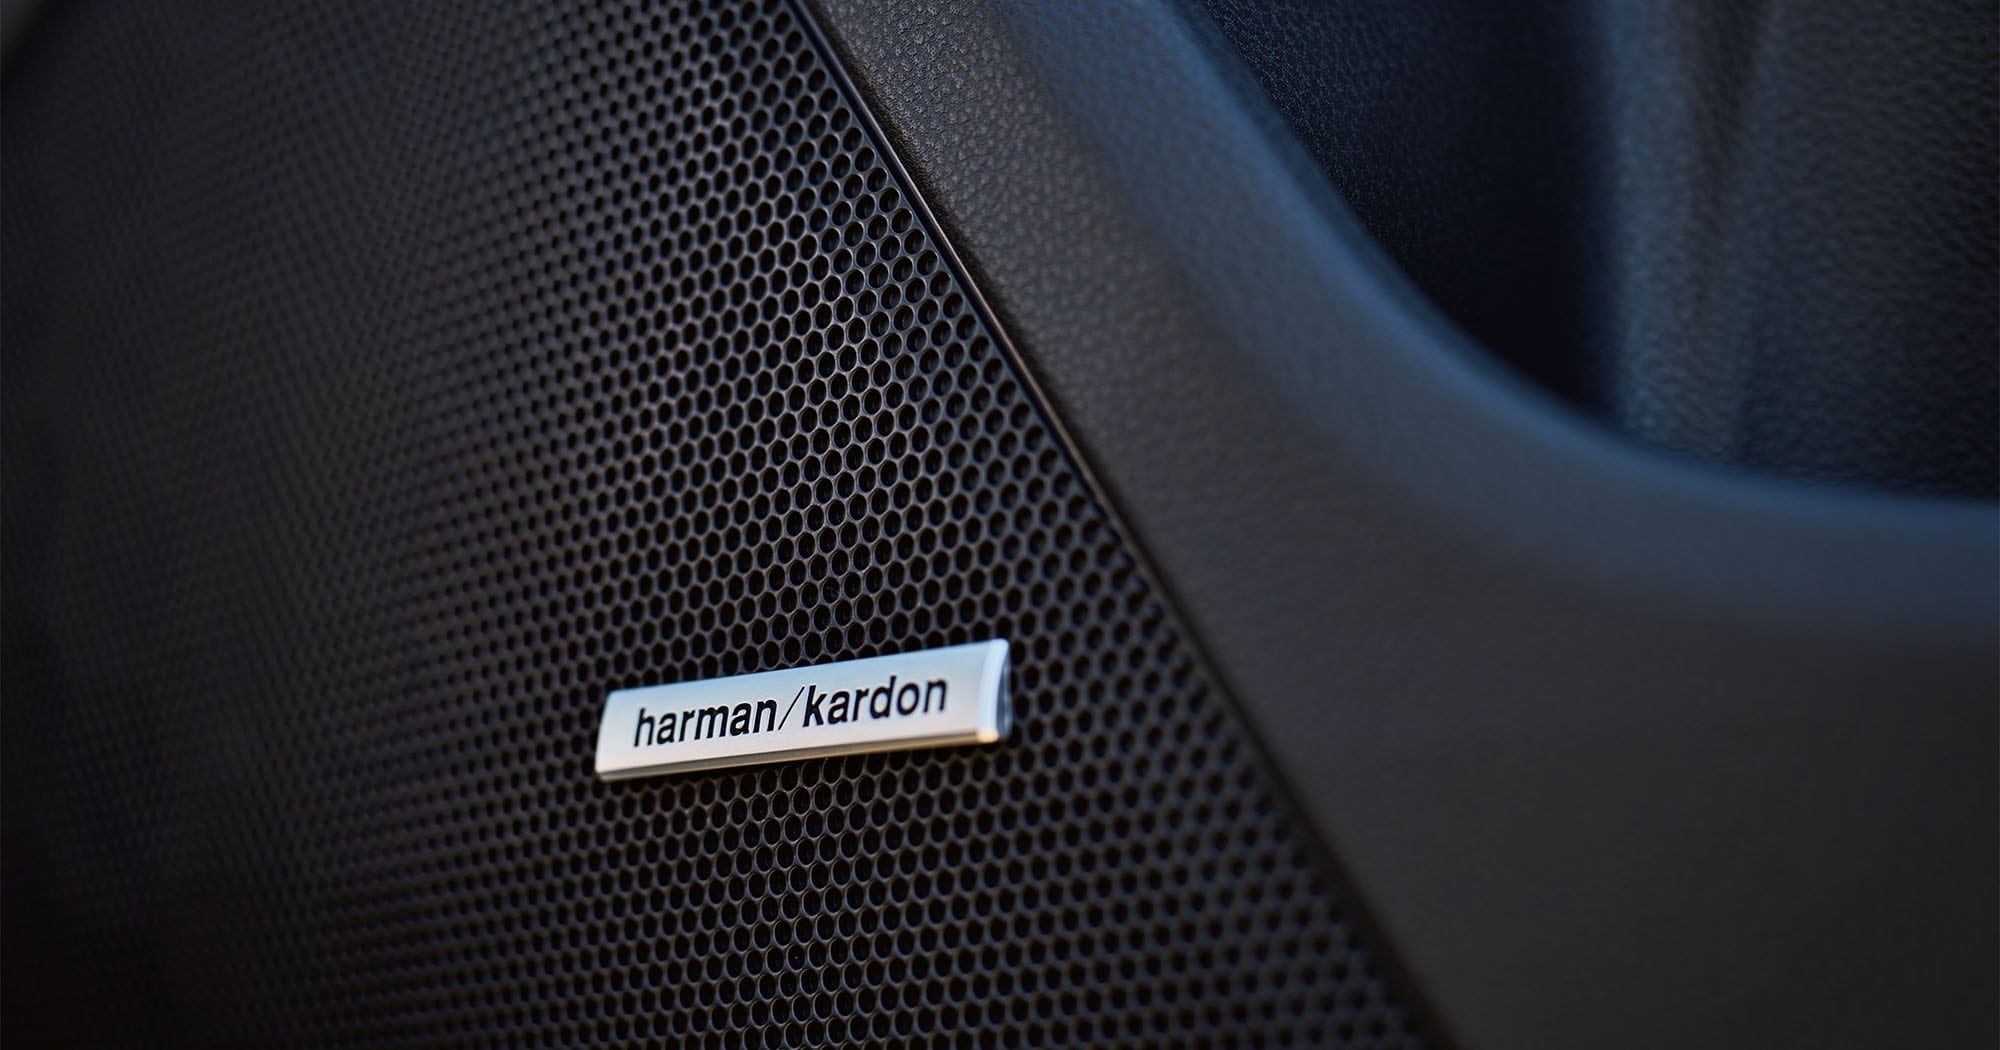  A close-up of one of the Harman Kardon premium audio system speakers in the 2023 Impreza.